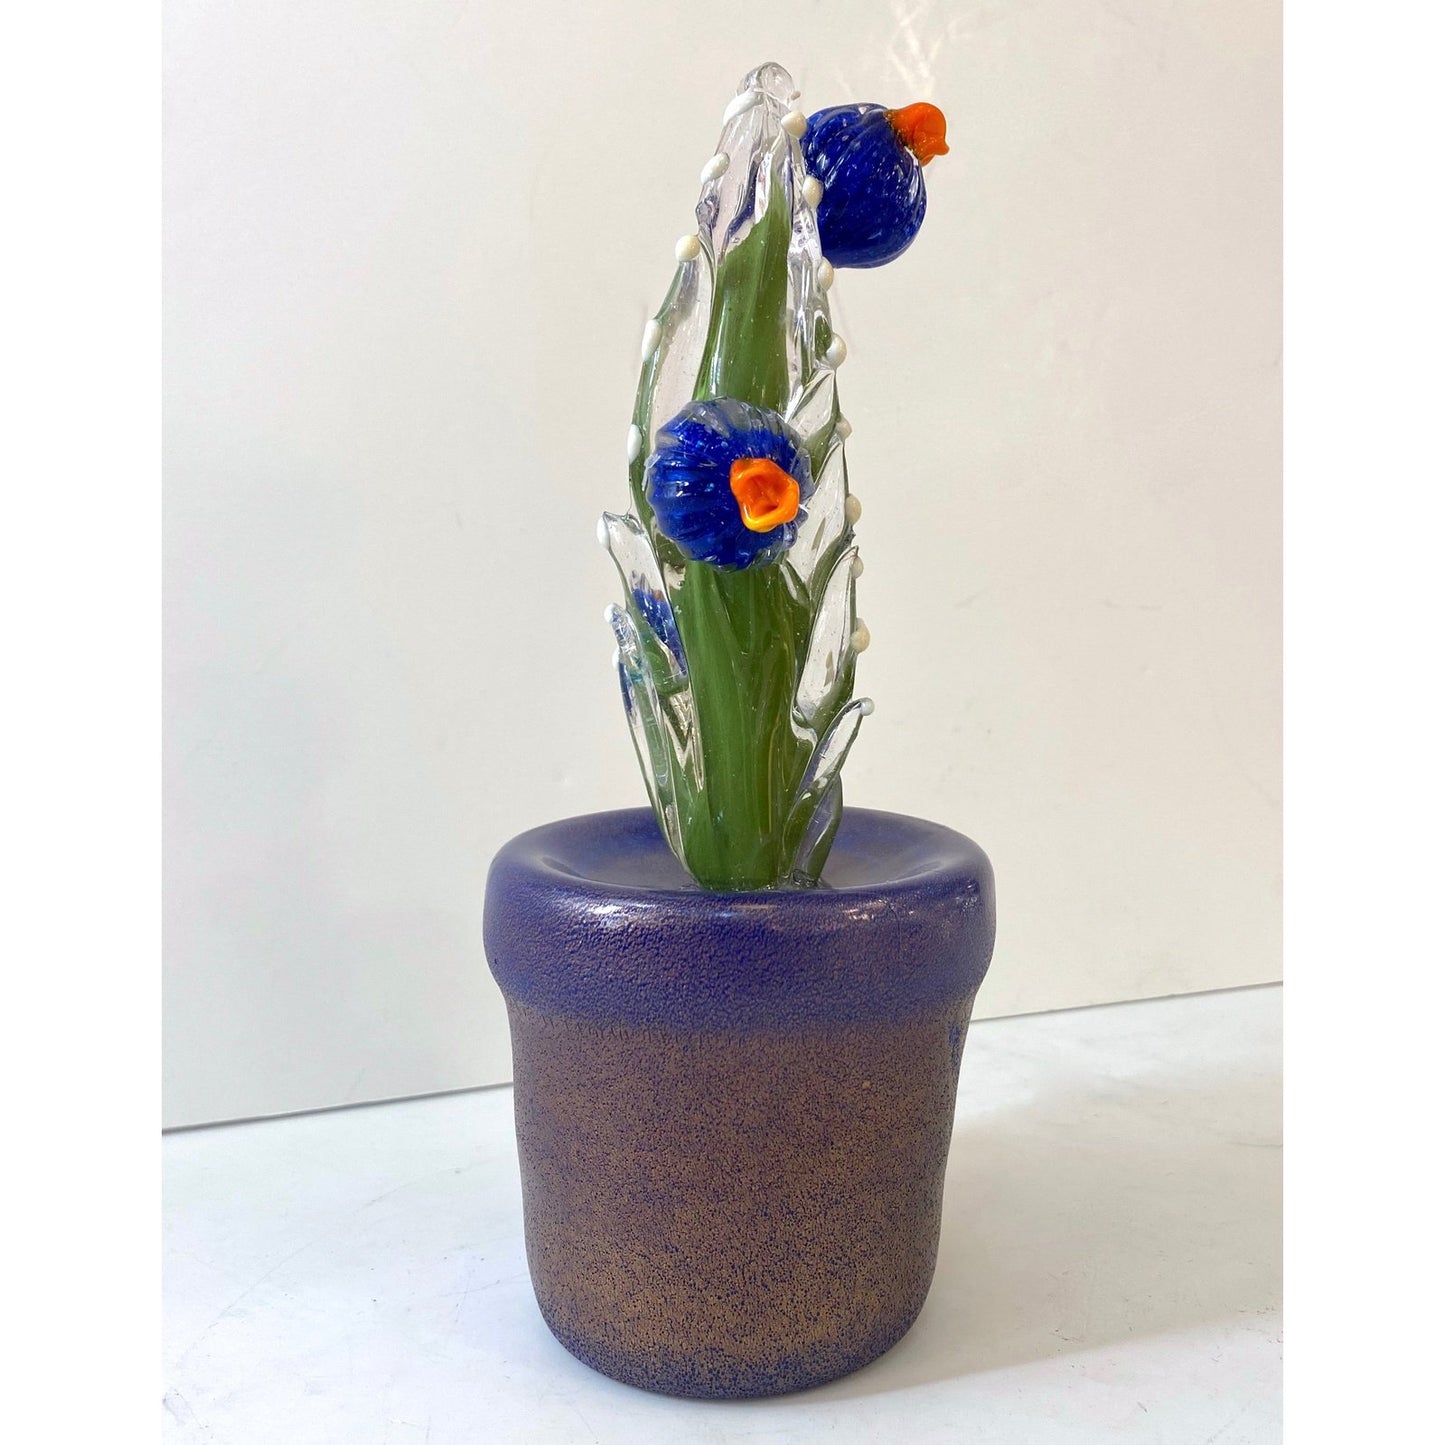 2000s Italian Moss Green Gold Murano Art Glass Cactus Plant with Blue Flowers